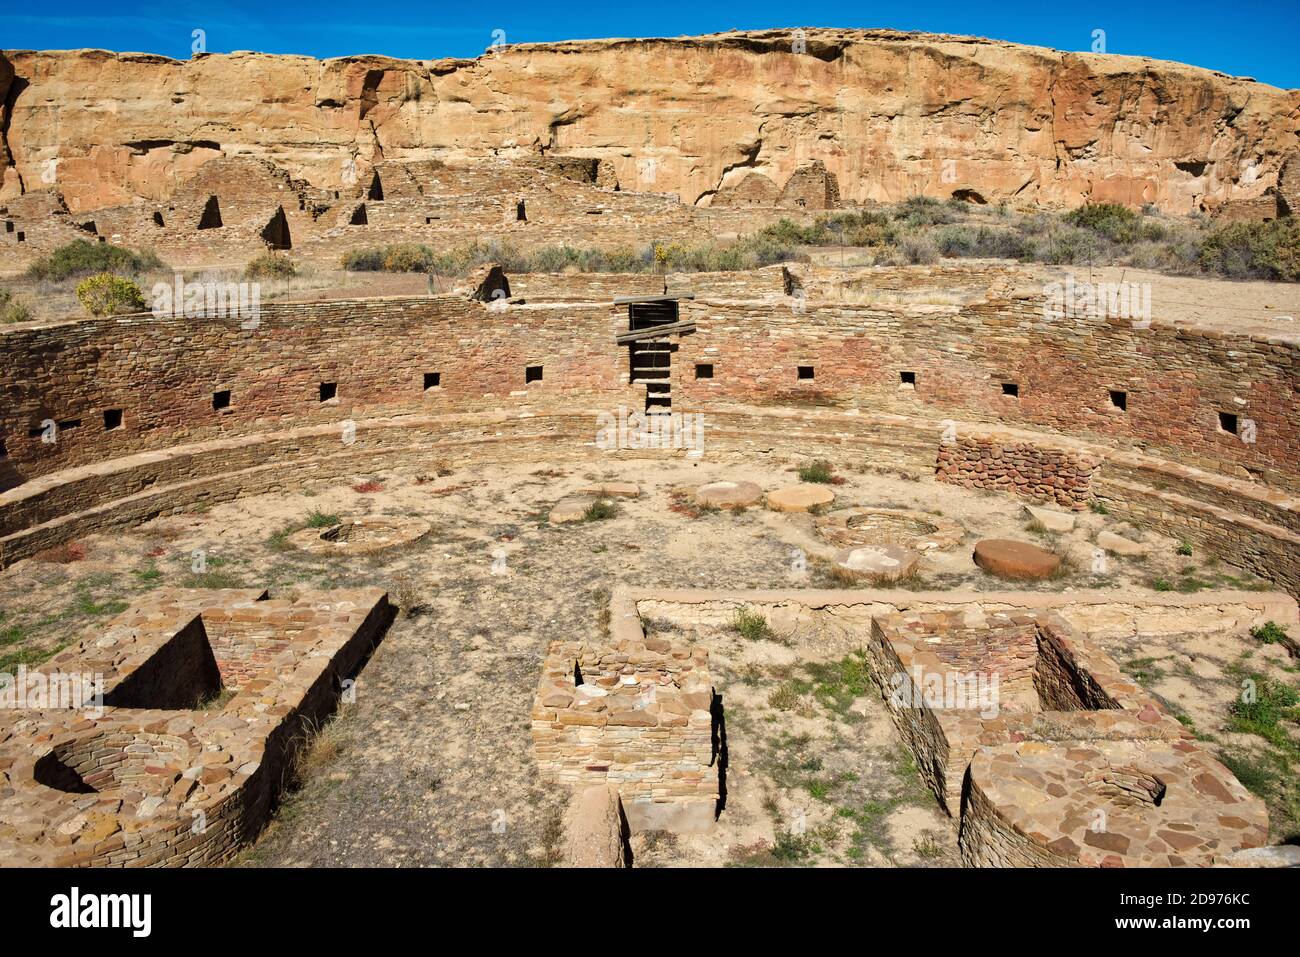 Chetro ketl is an ancestral Puebloan great house located in Chaco Canyon Cultural Park, New Mexico. Stock Photo